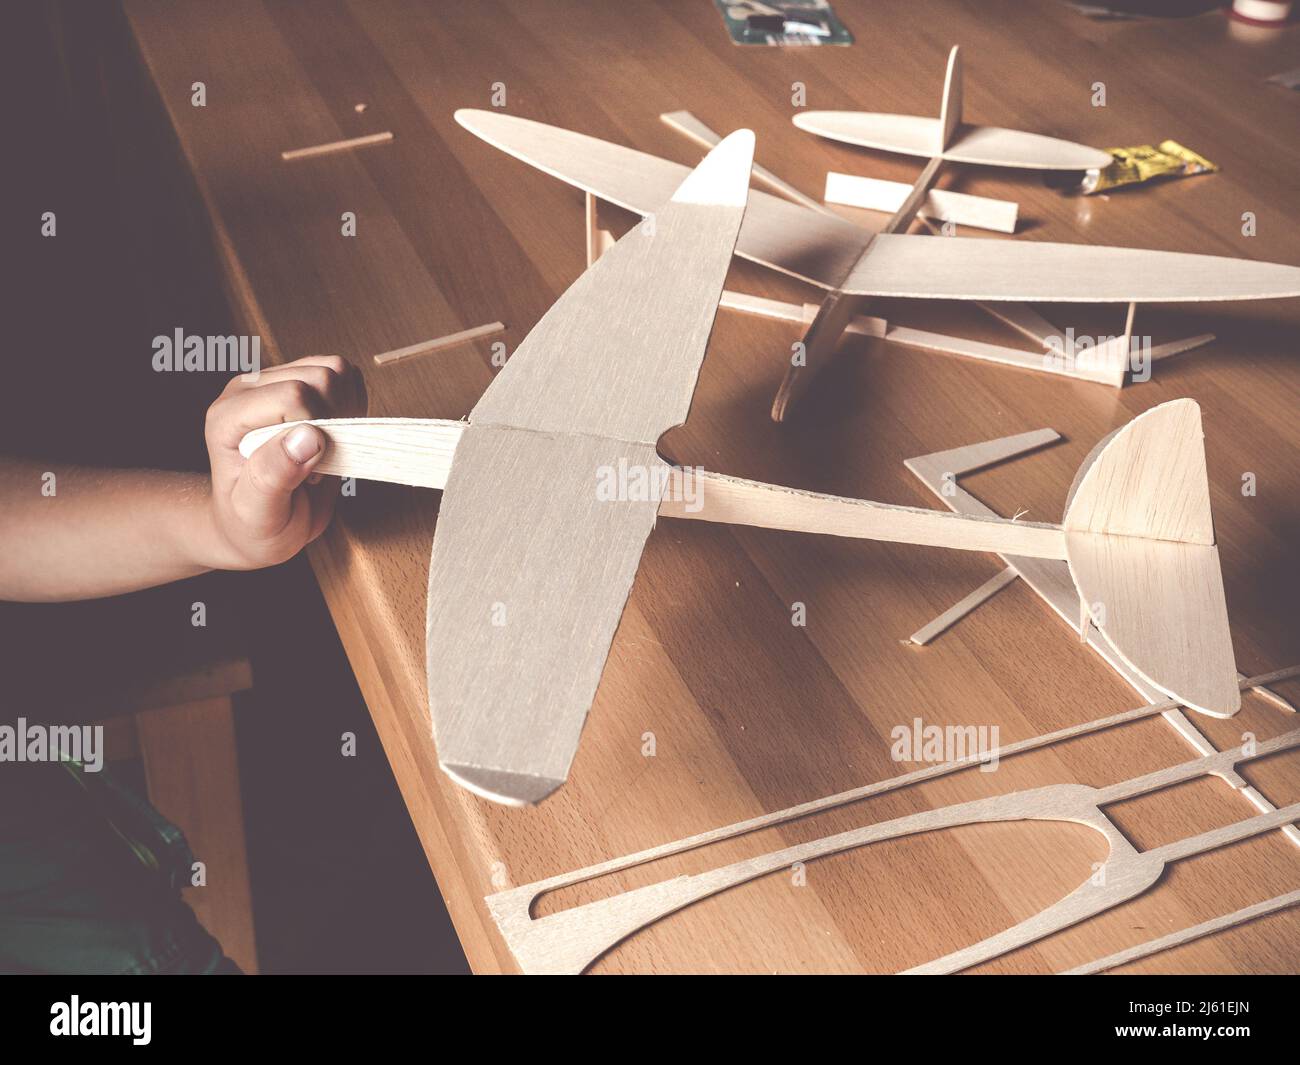 boys hand holding selfmade wooden airplane model Stock Photo